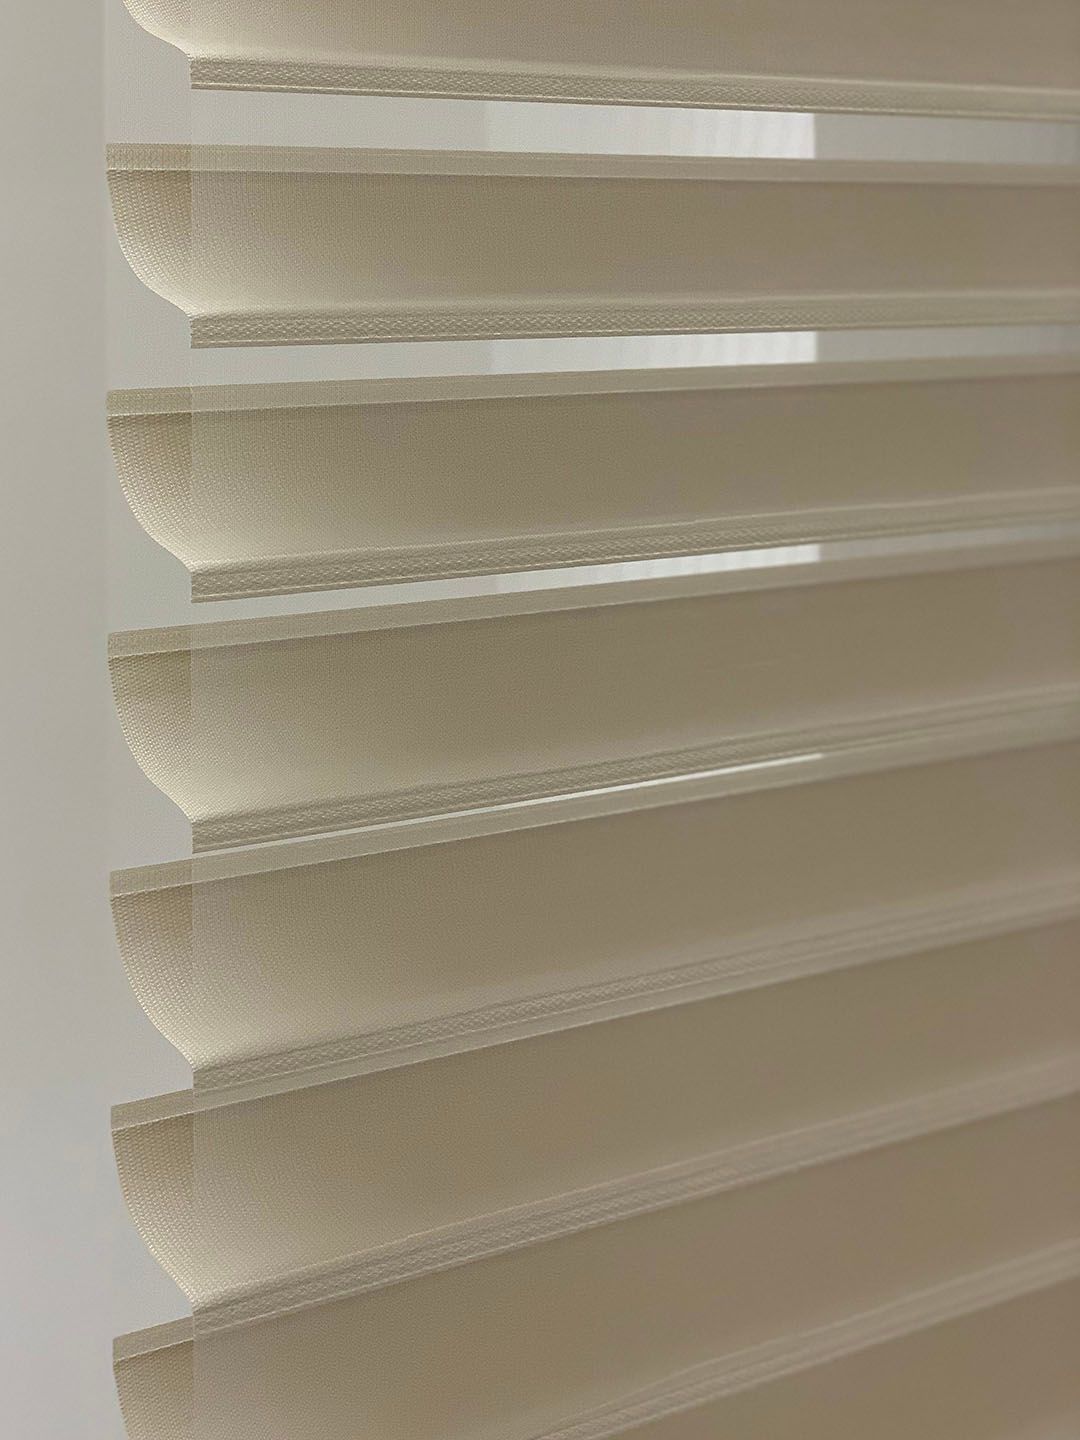 Close up of Silhouette: tri-shade window blinds